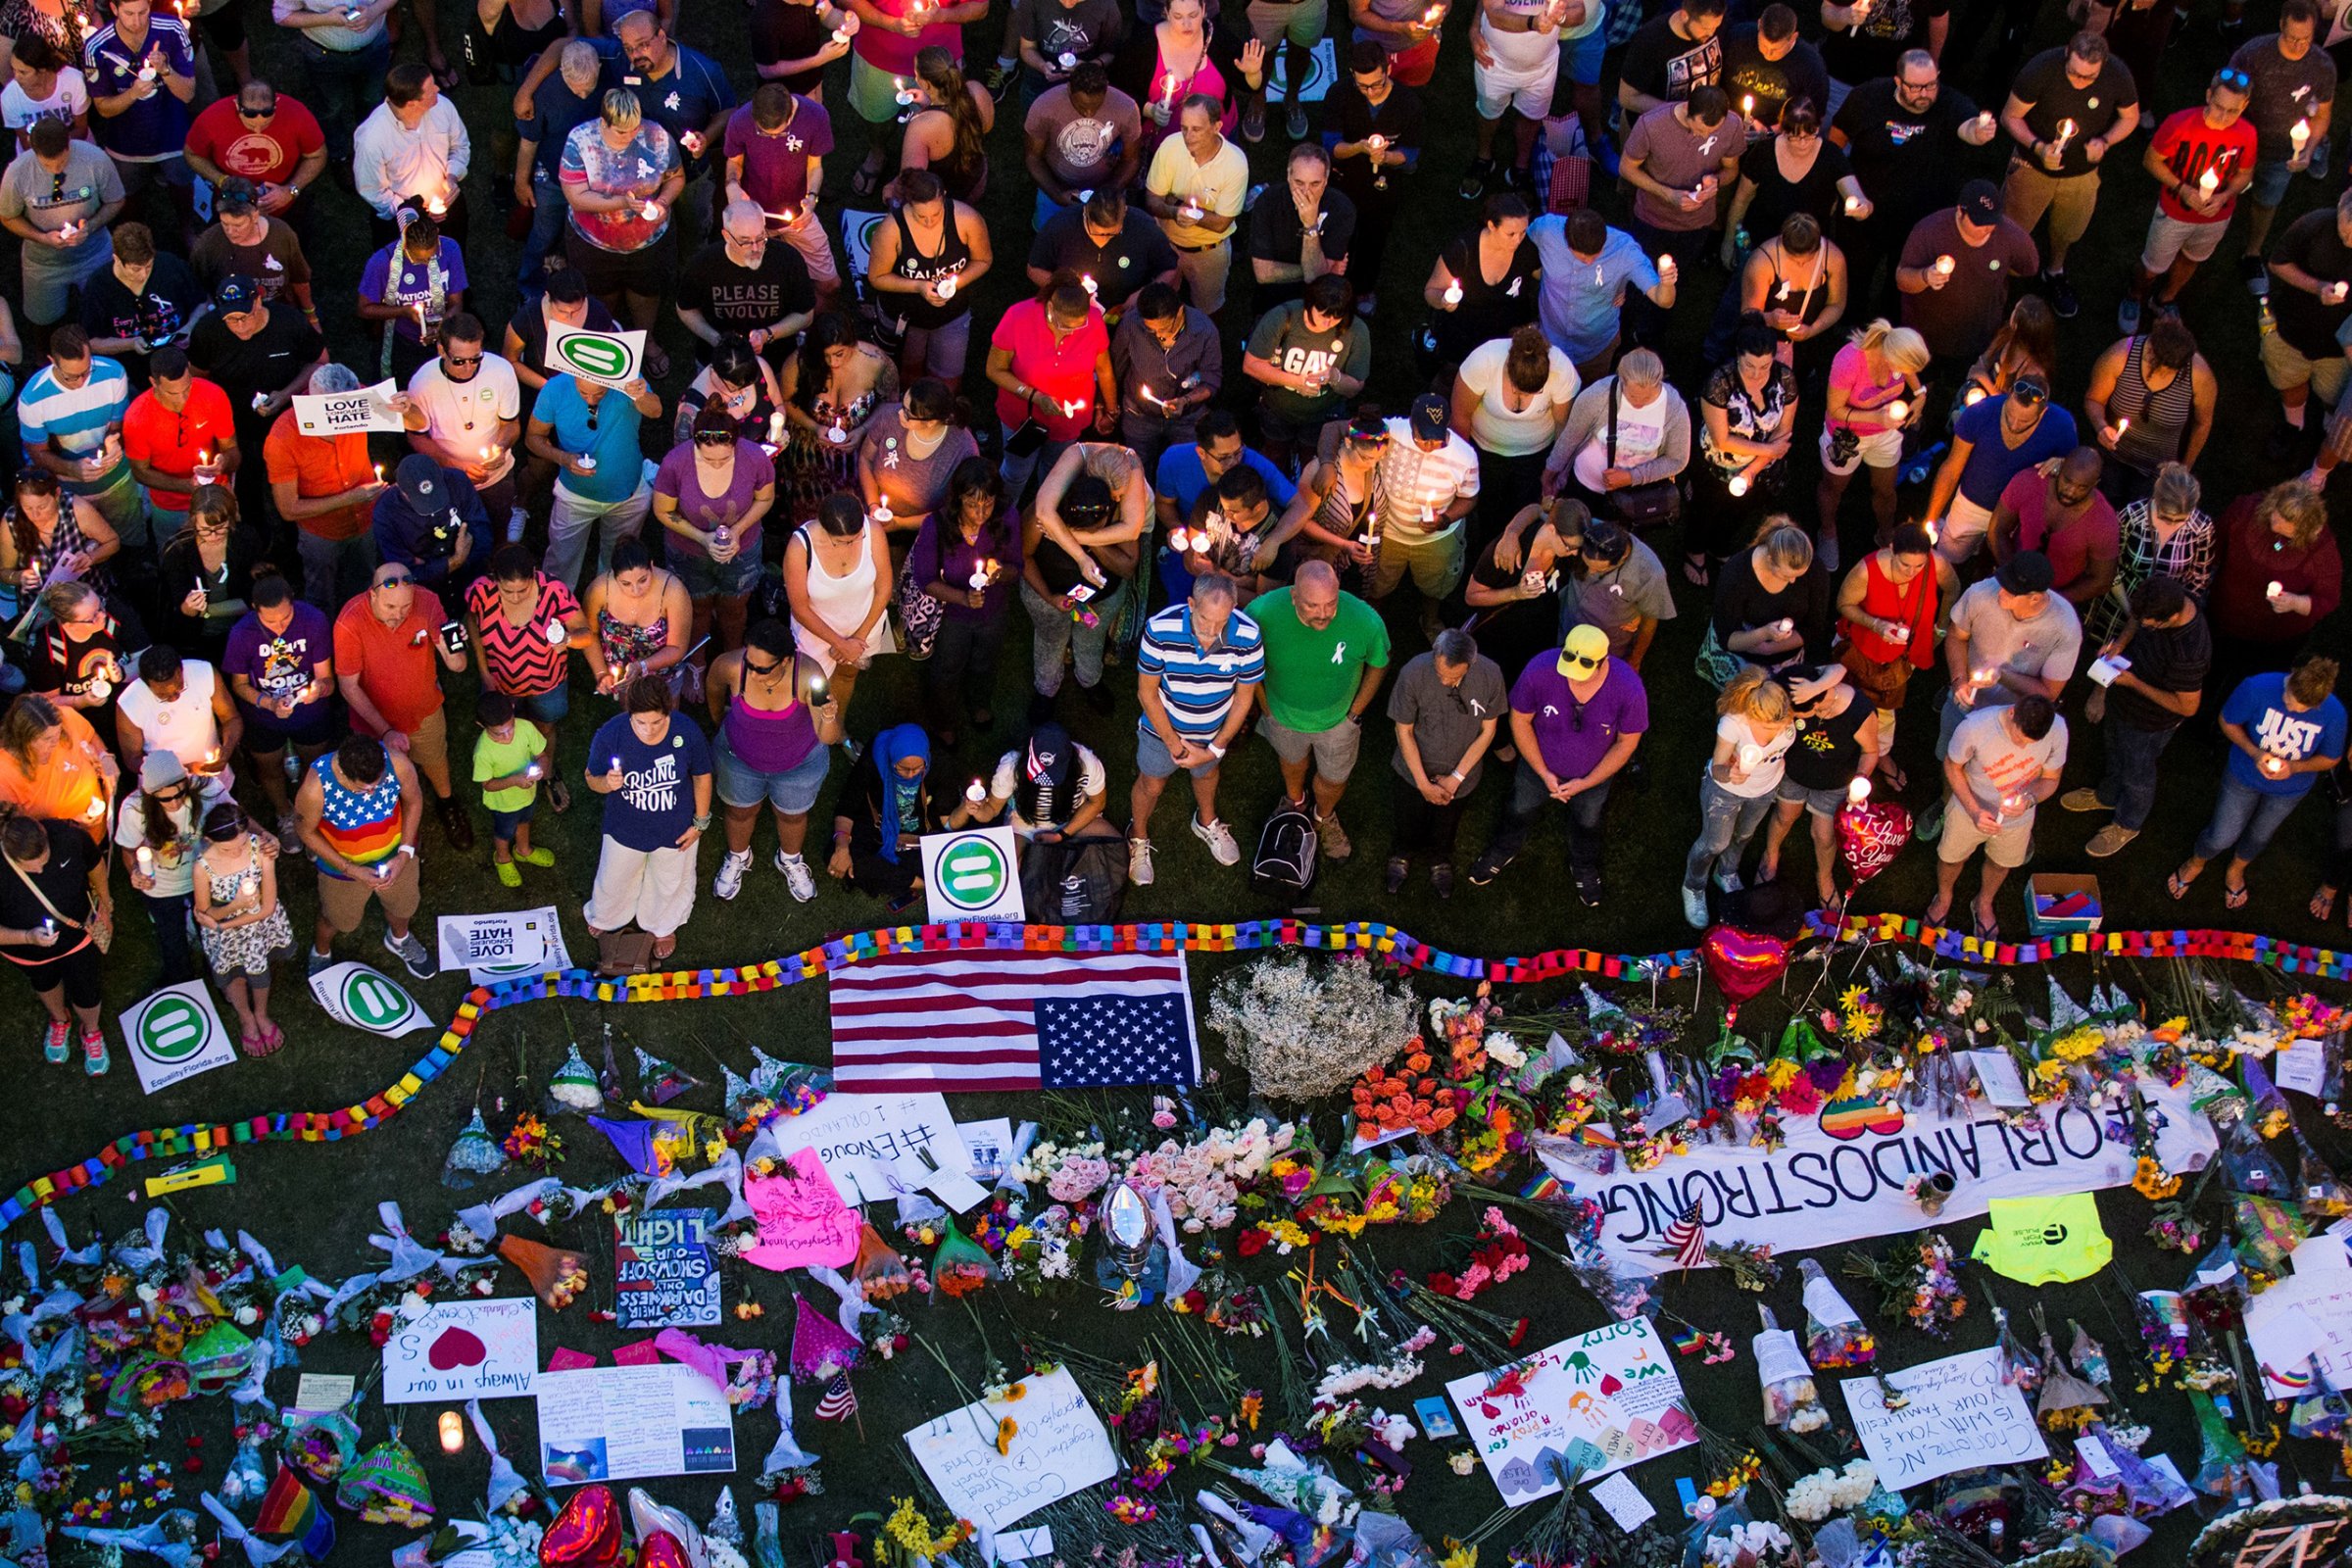 Thousands gather at the Dr. Phillips Center for the Performing Arts to pay their respects for those lost in the Pulse nightclub shooting in Orlando, Fla., on June 13, 2016.